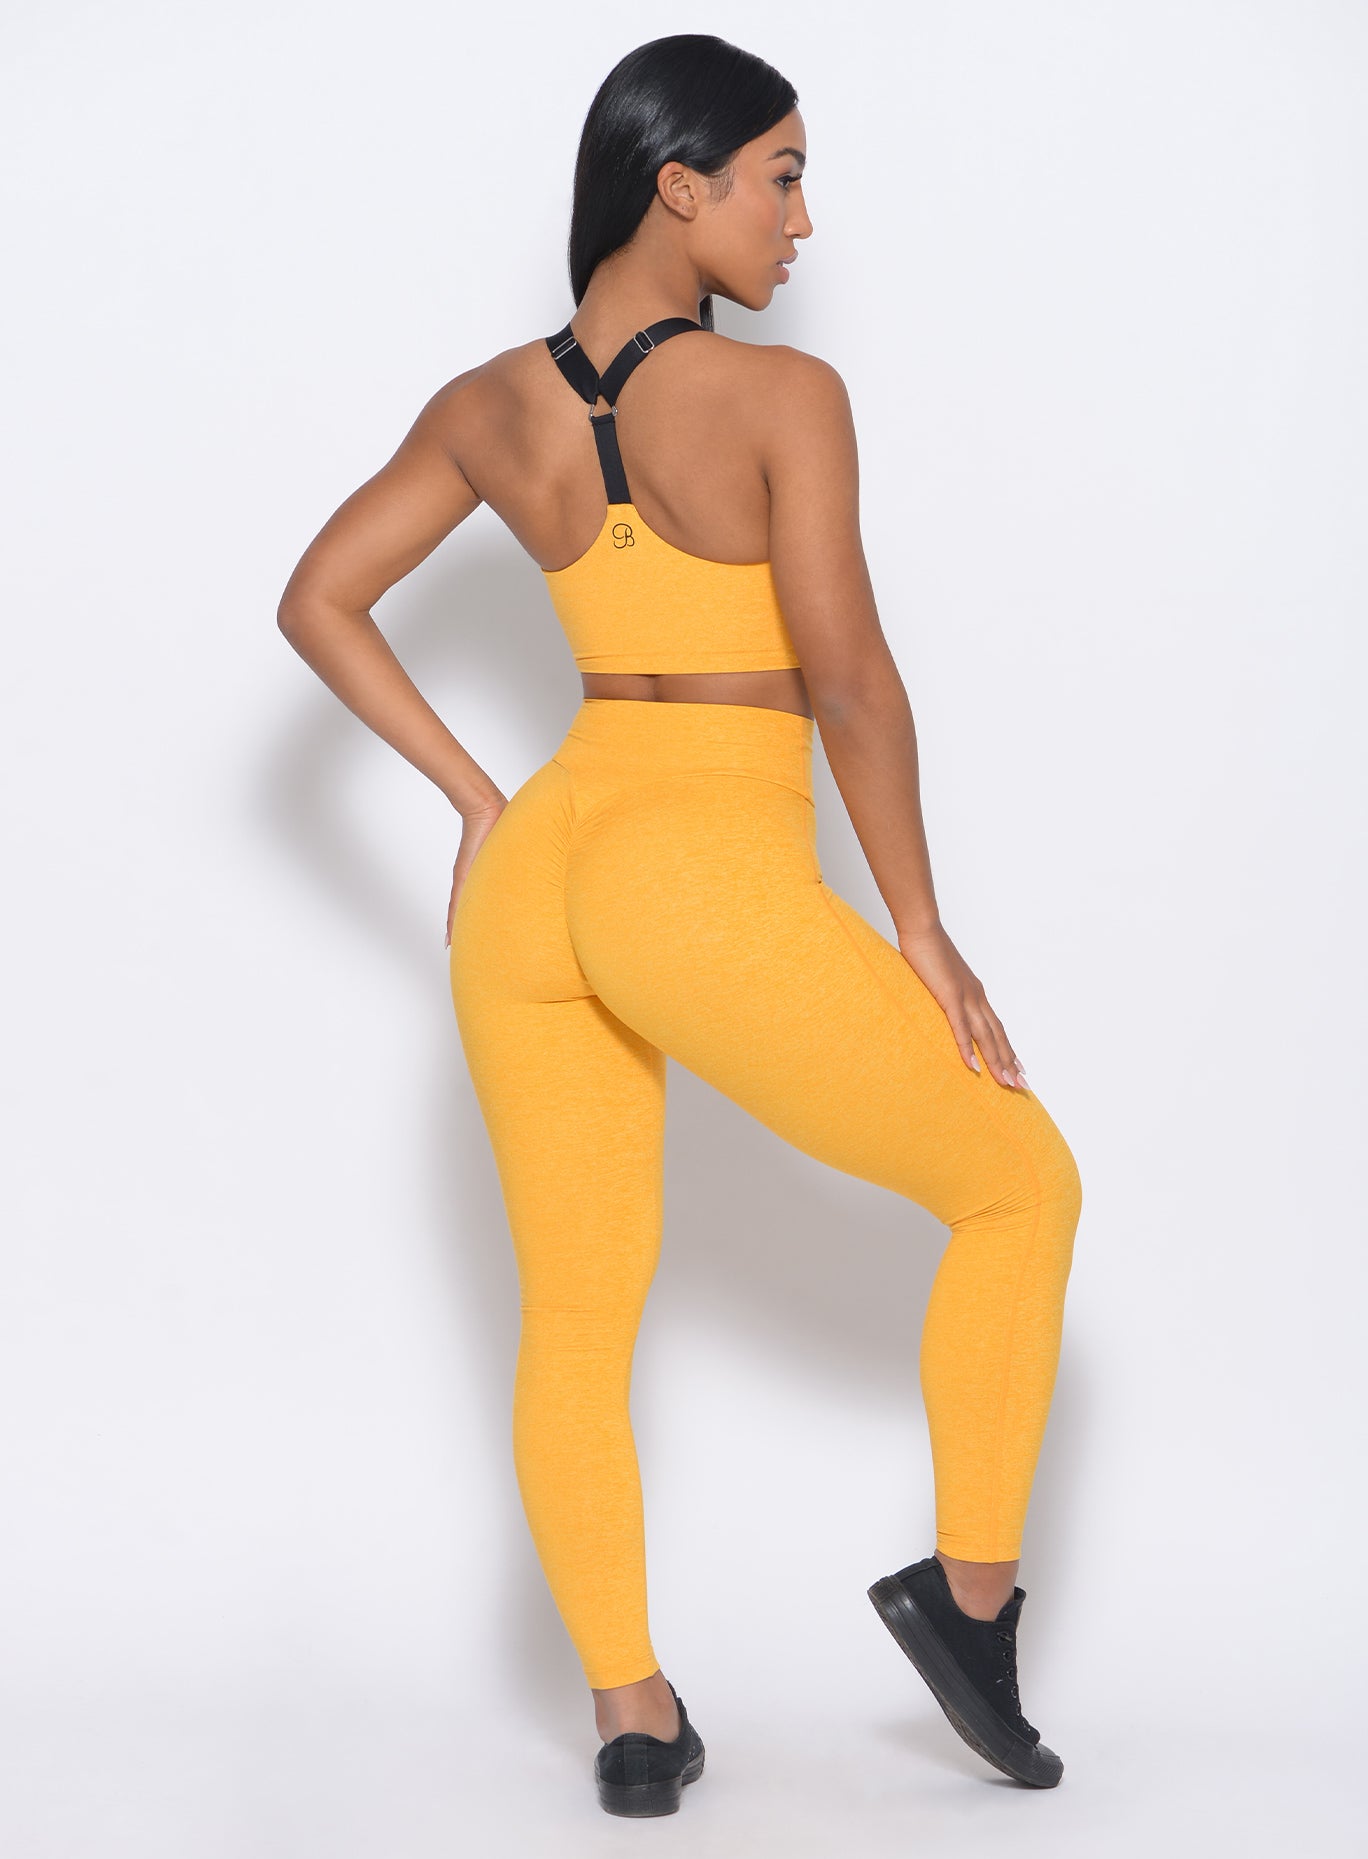 Back view of the model in our boost leggings in sunkissed color and a matching bra